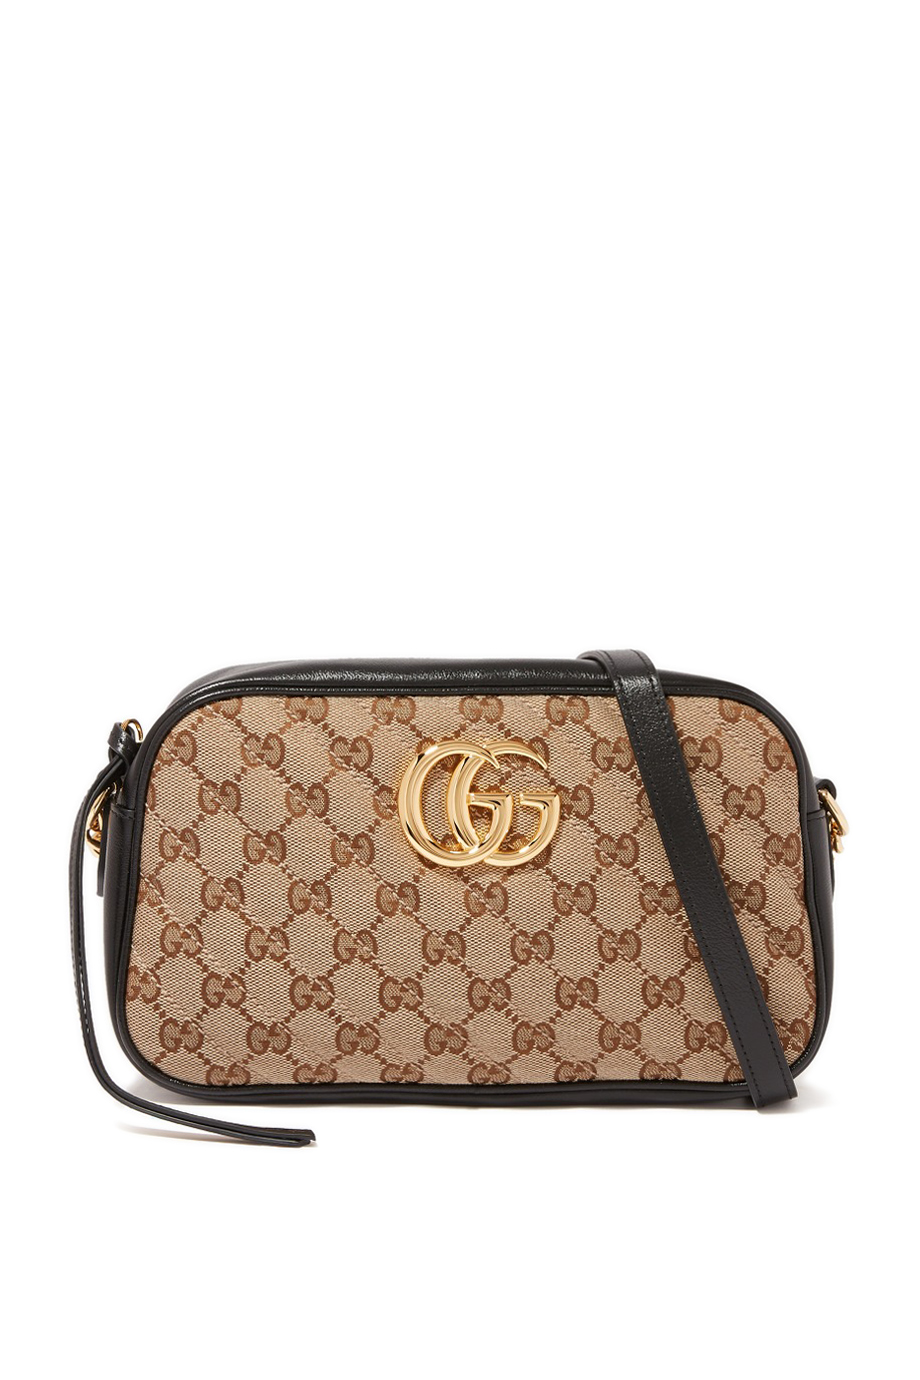 Buy Black Gucci GG Marmont Small Shoulder Bag - Womens for AED 3850.00 Shoulder Bags ...